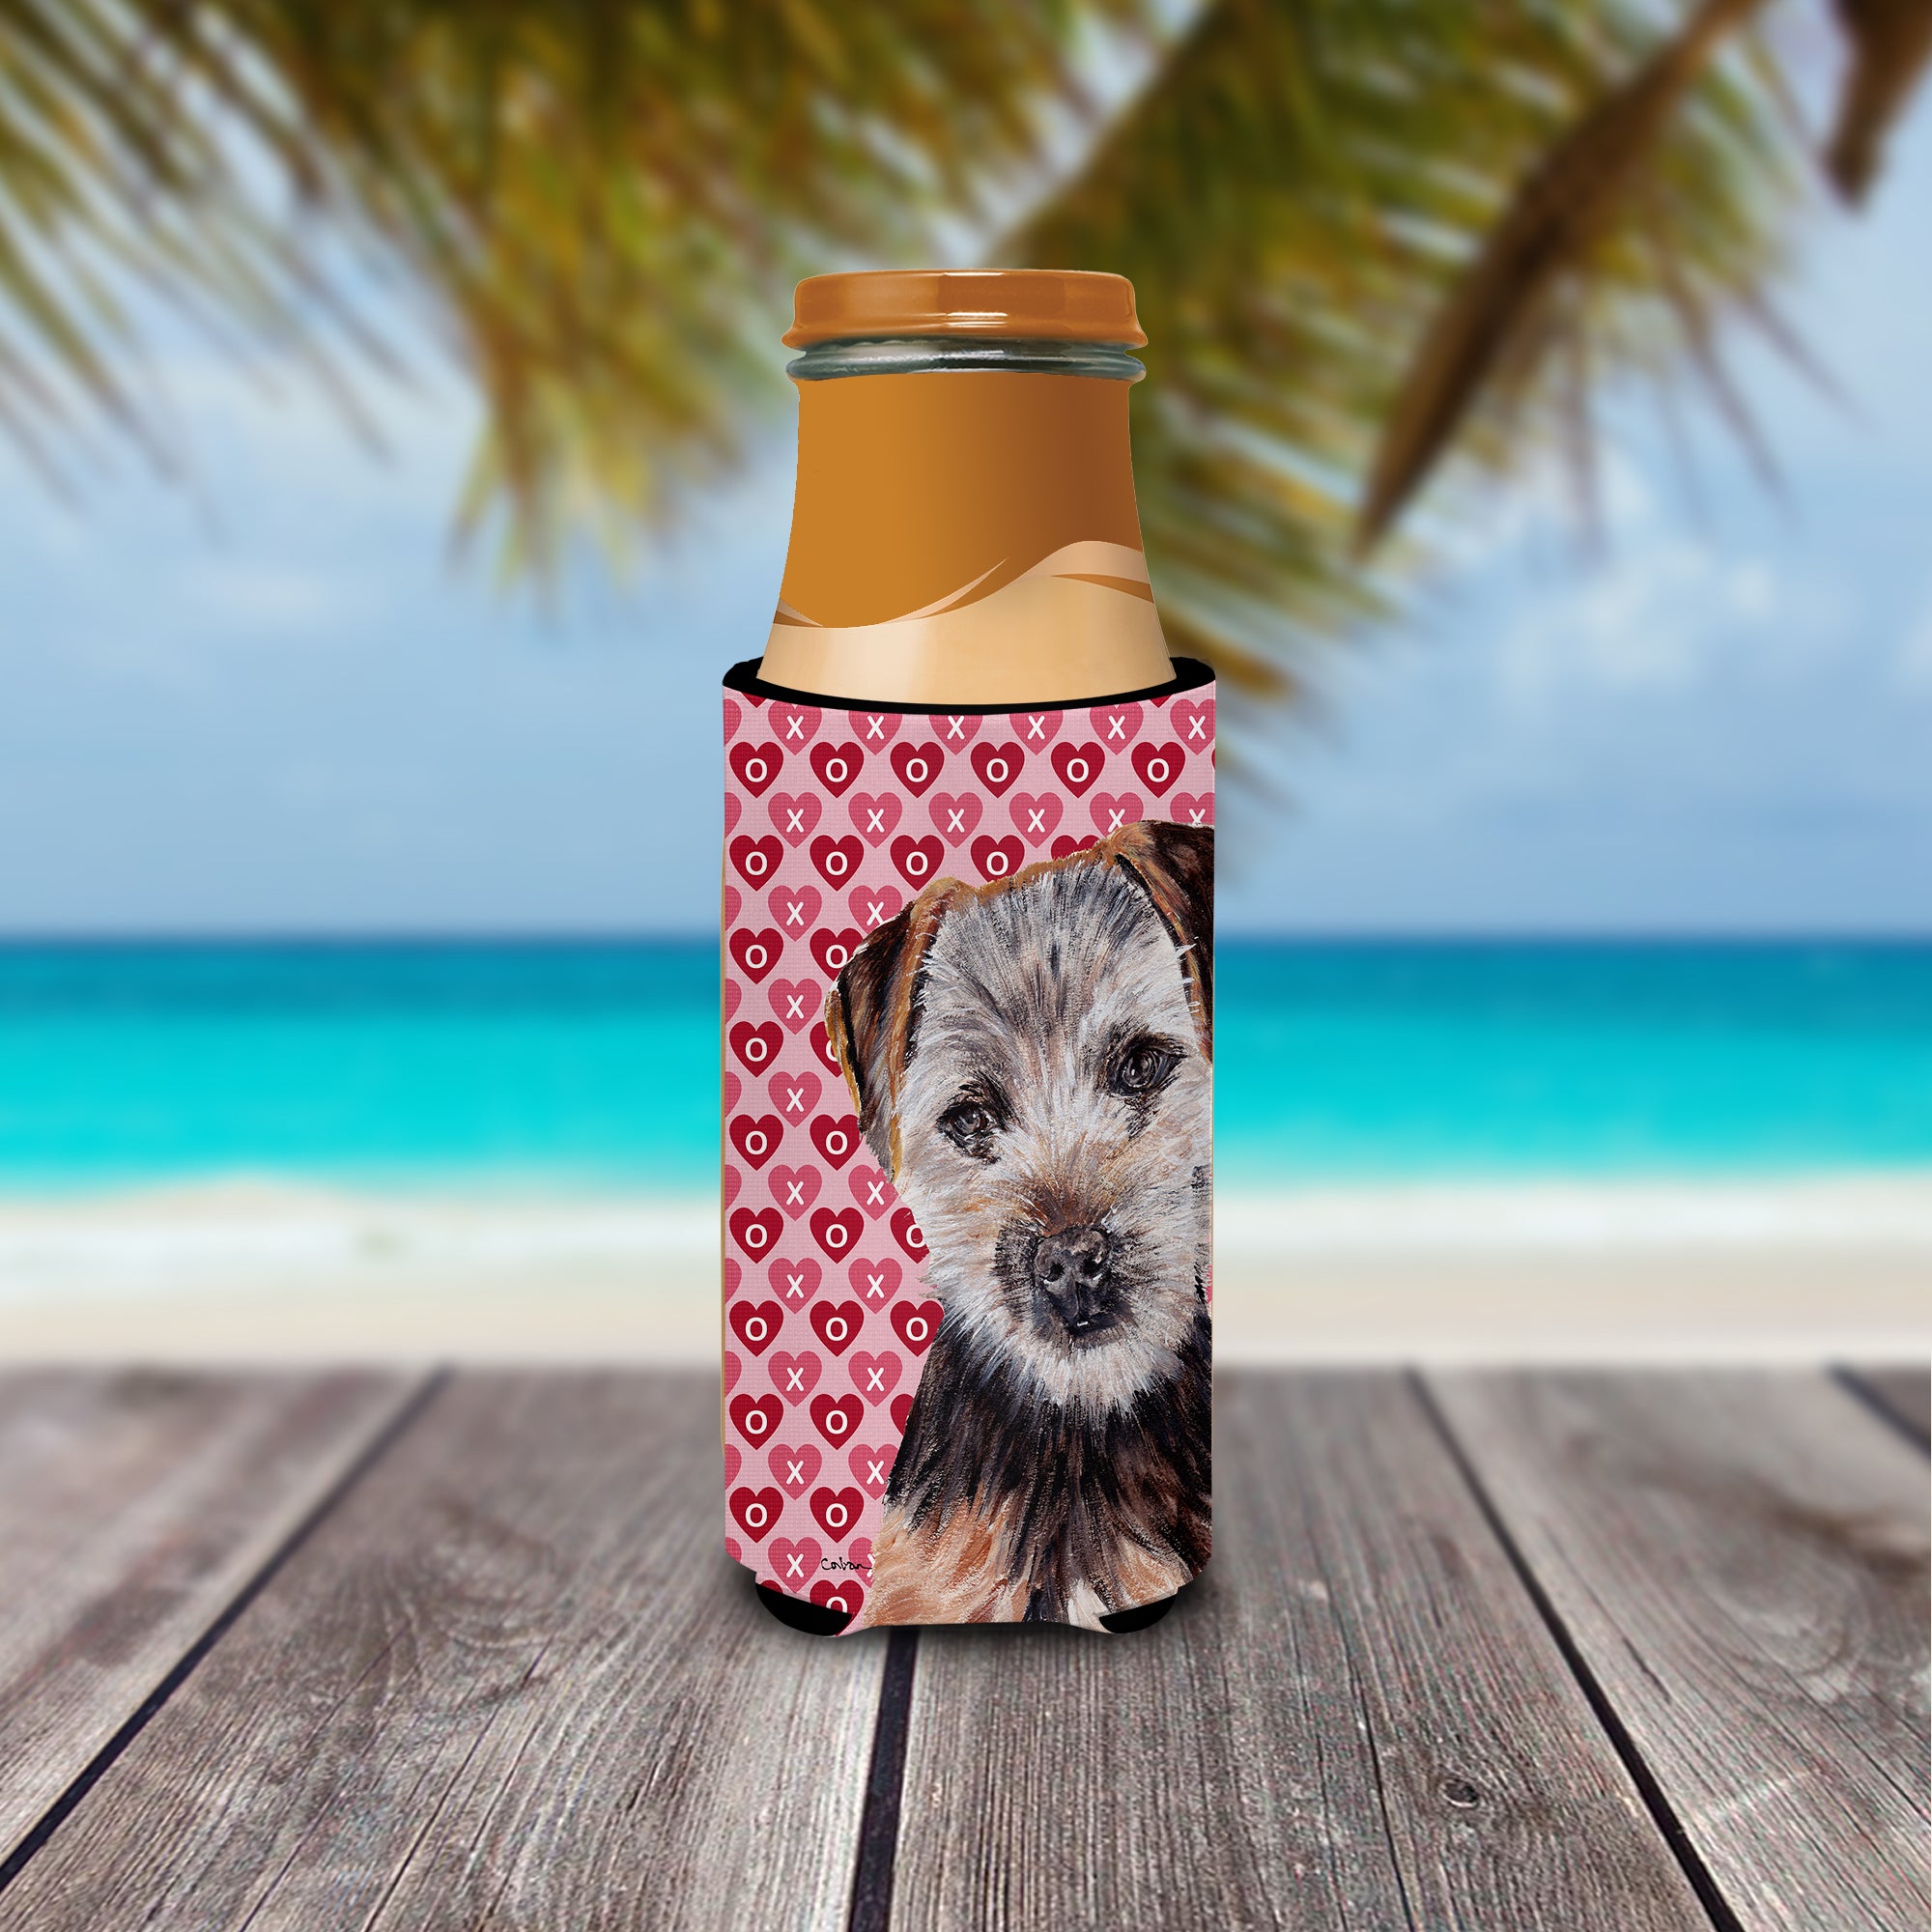 Norfolk Terrier Puppy Hearts and Love Ultra Beverage Insulators for slim cans SC9711MUK